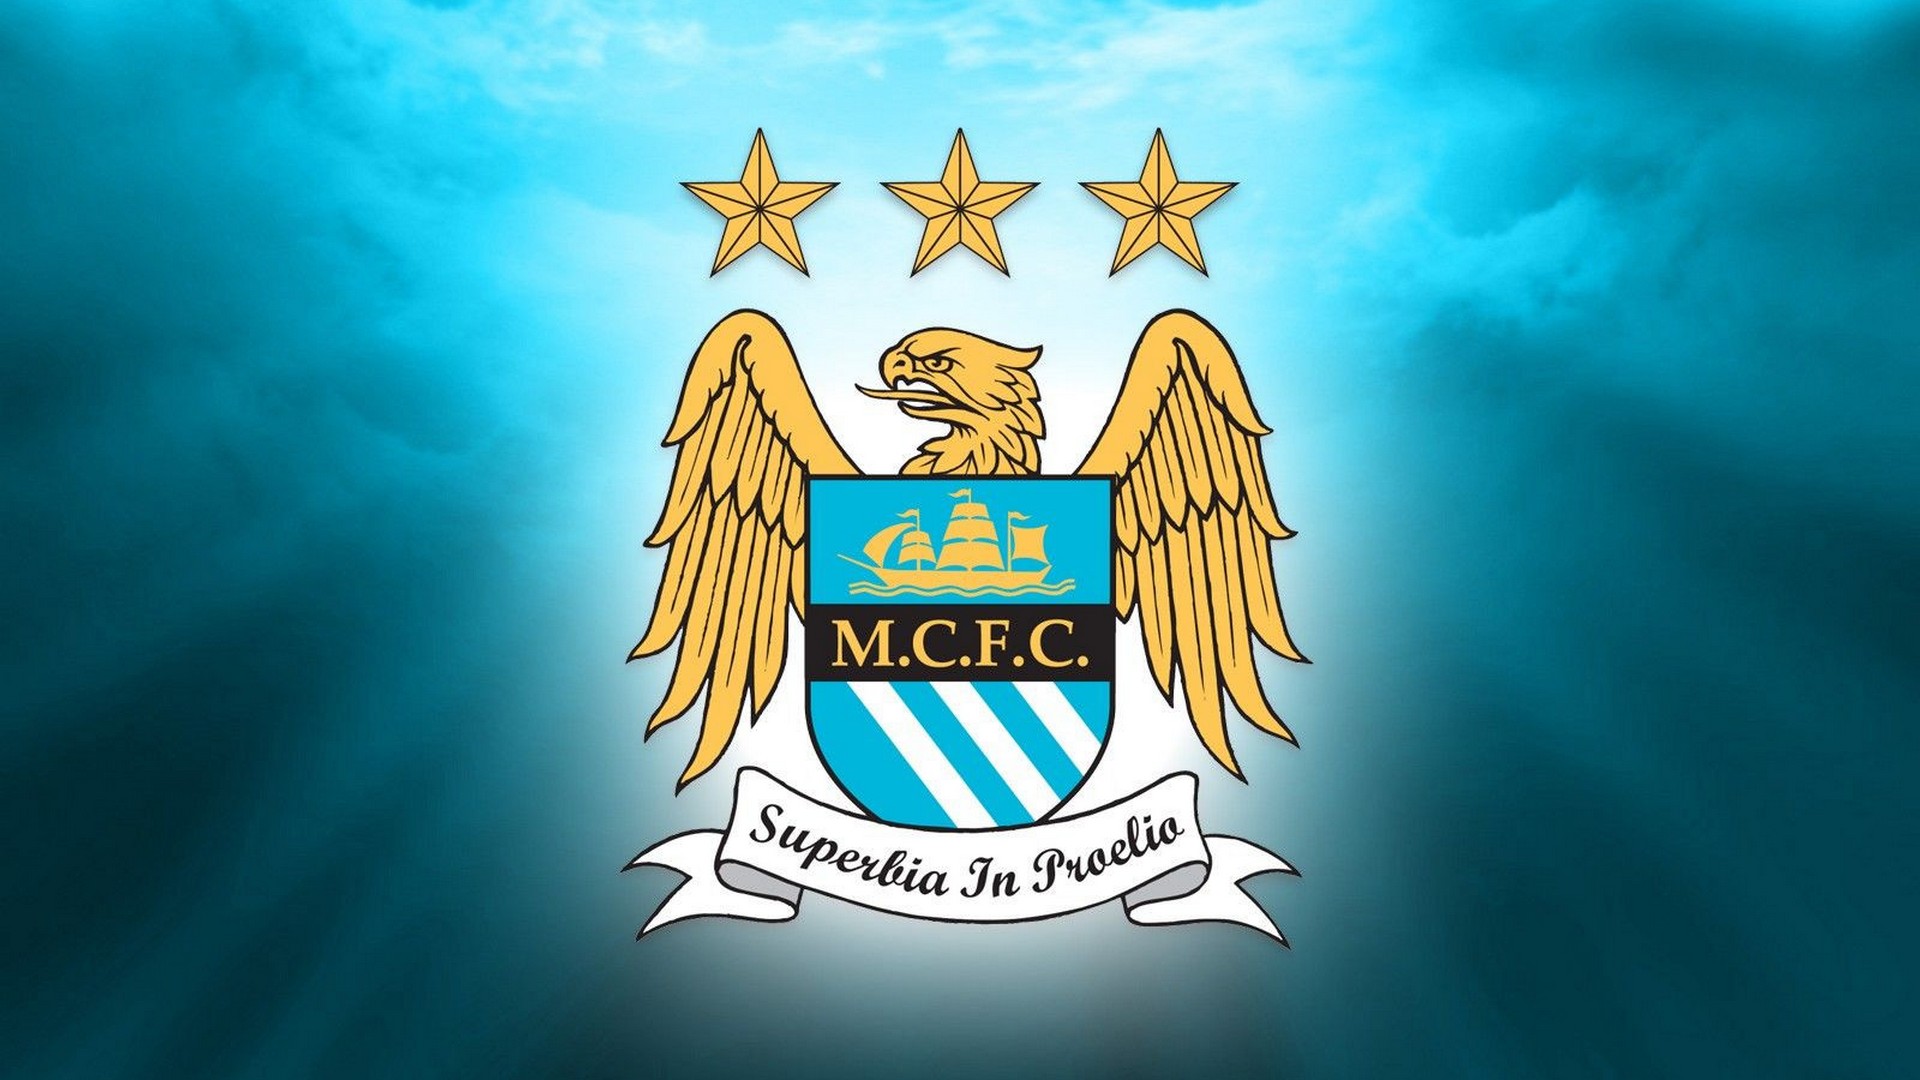 HD Desktop Wallpaper Manchester City FC with high-resolution 1920x1080 pixel. You can use this wallpaper for your Desktop Computers, Mac Screensavers, Windows Backgrounds, iPhone Wallpapers, Tablet or Android Lock screen and another Mobile device